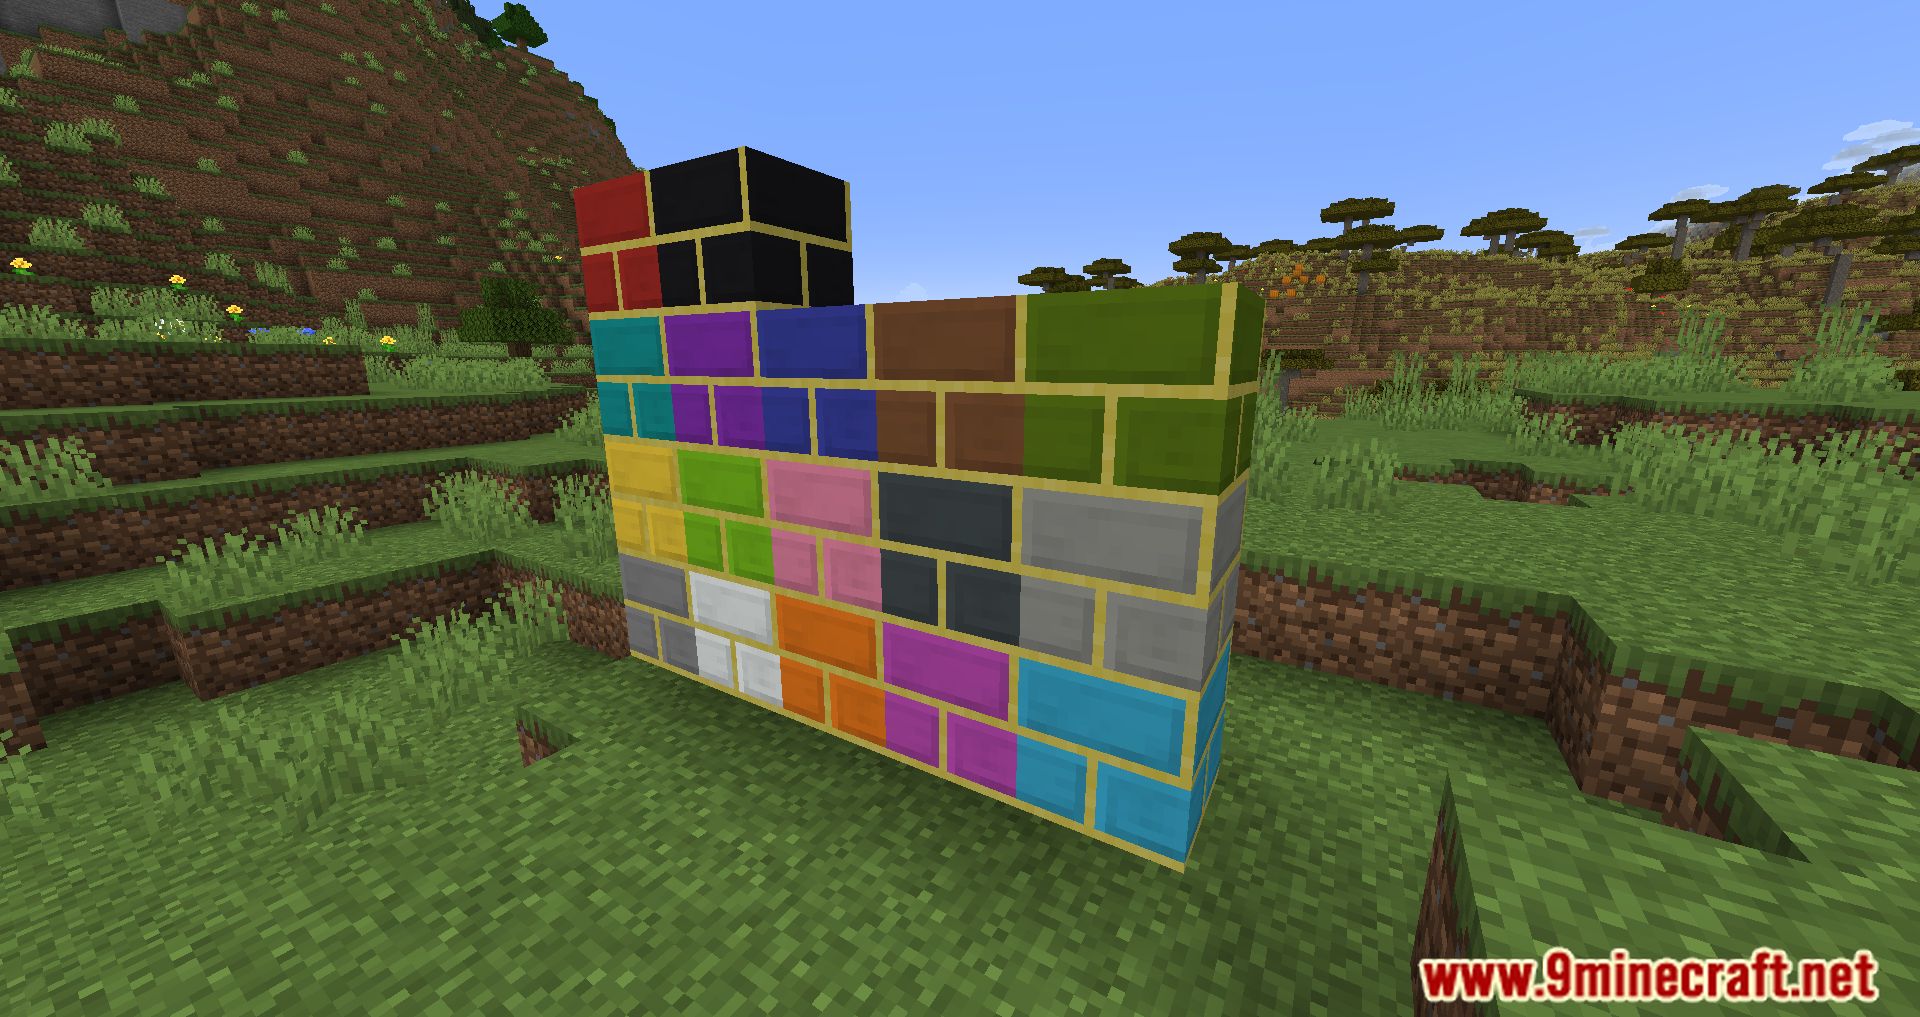 Painter's Blocks Mod (1.19.3, 1.18.2) - A Bunch Of Freely Dyeable Stone Blocks. 9